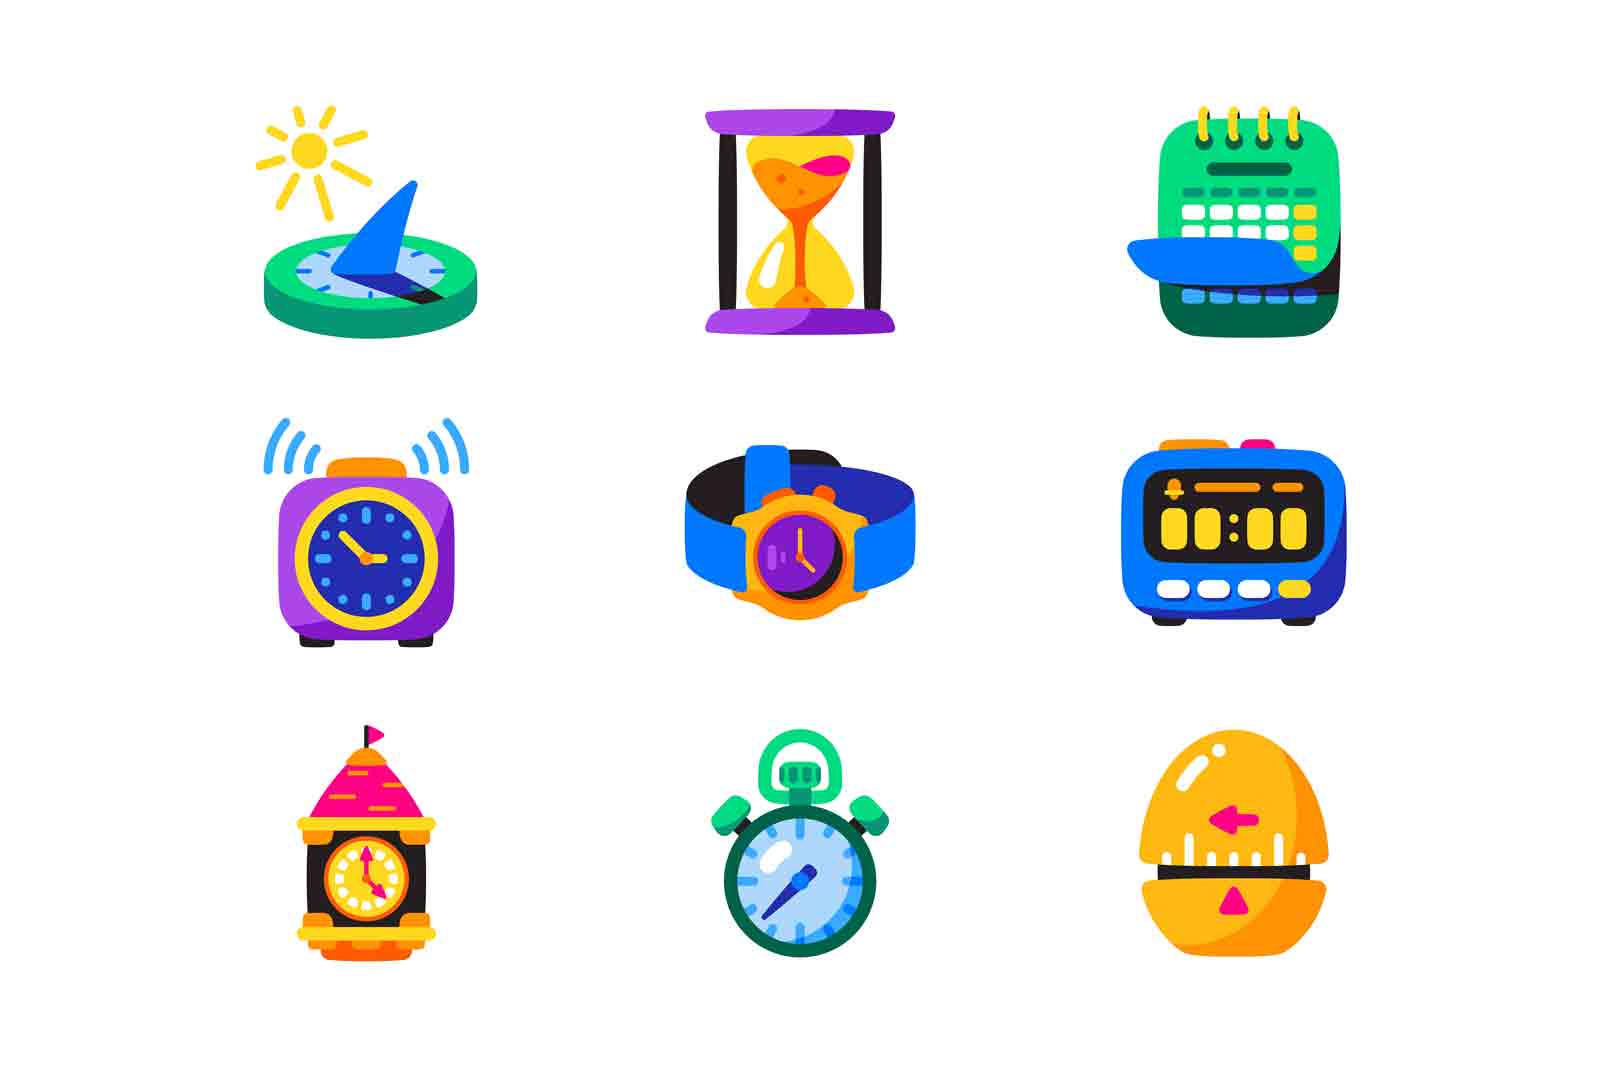 Time devices icons set vector illustration. Sundial, sandglass, calendar, alarm-clock,stopwatch and clock flat style concept